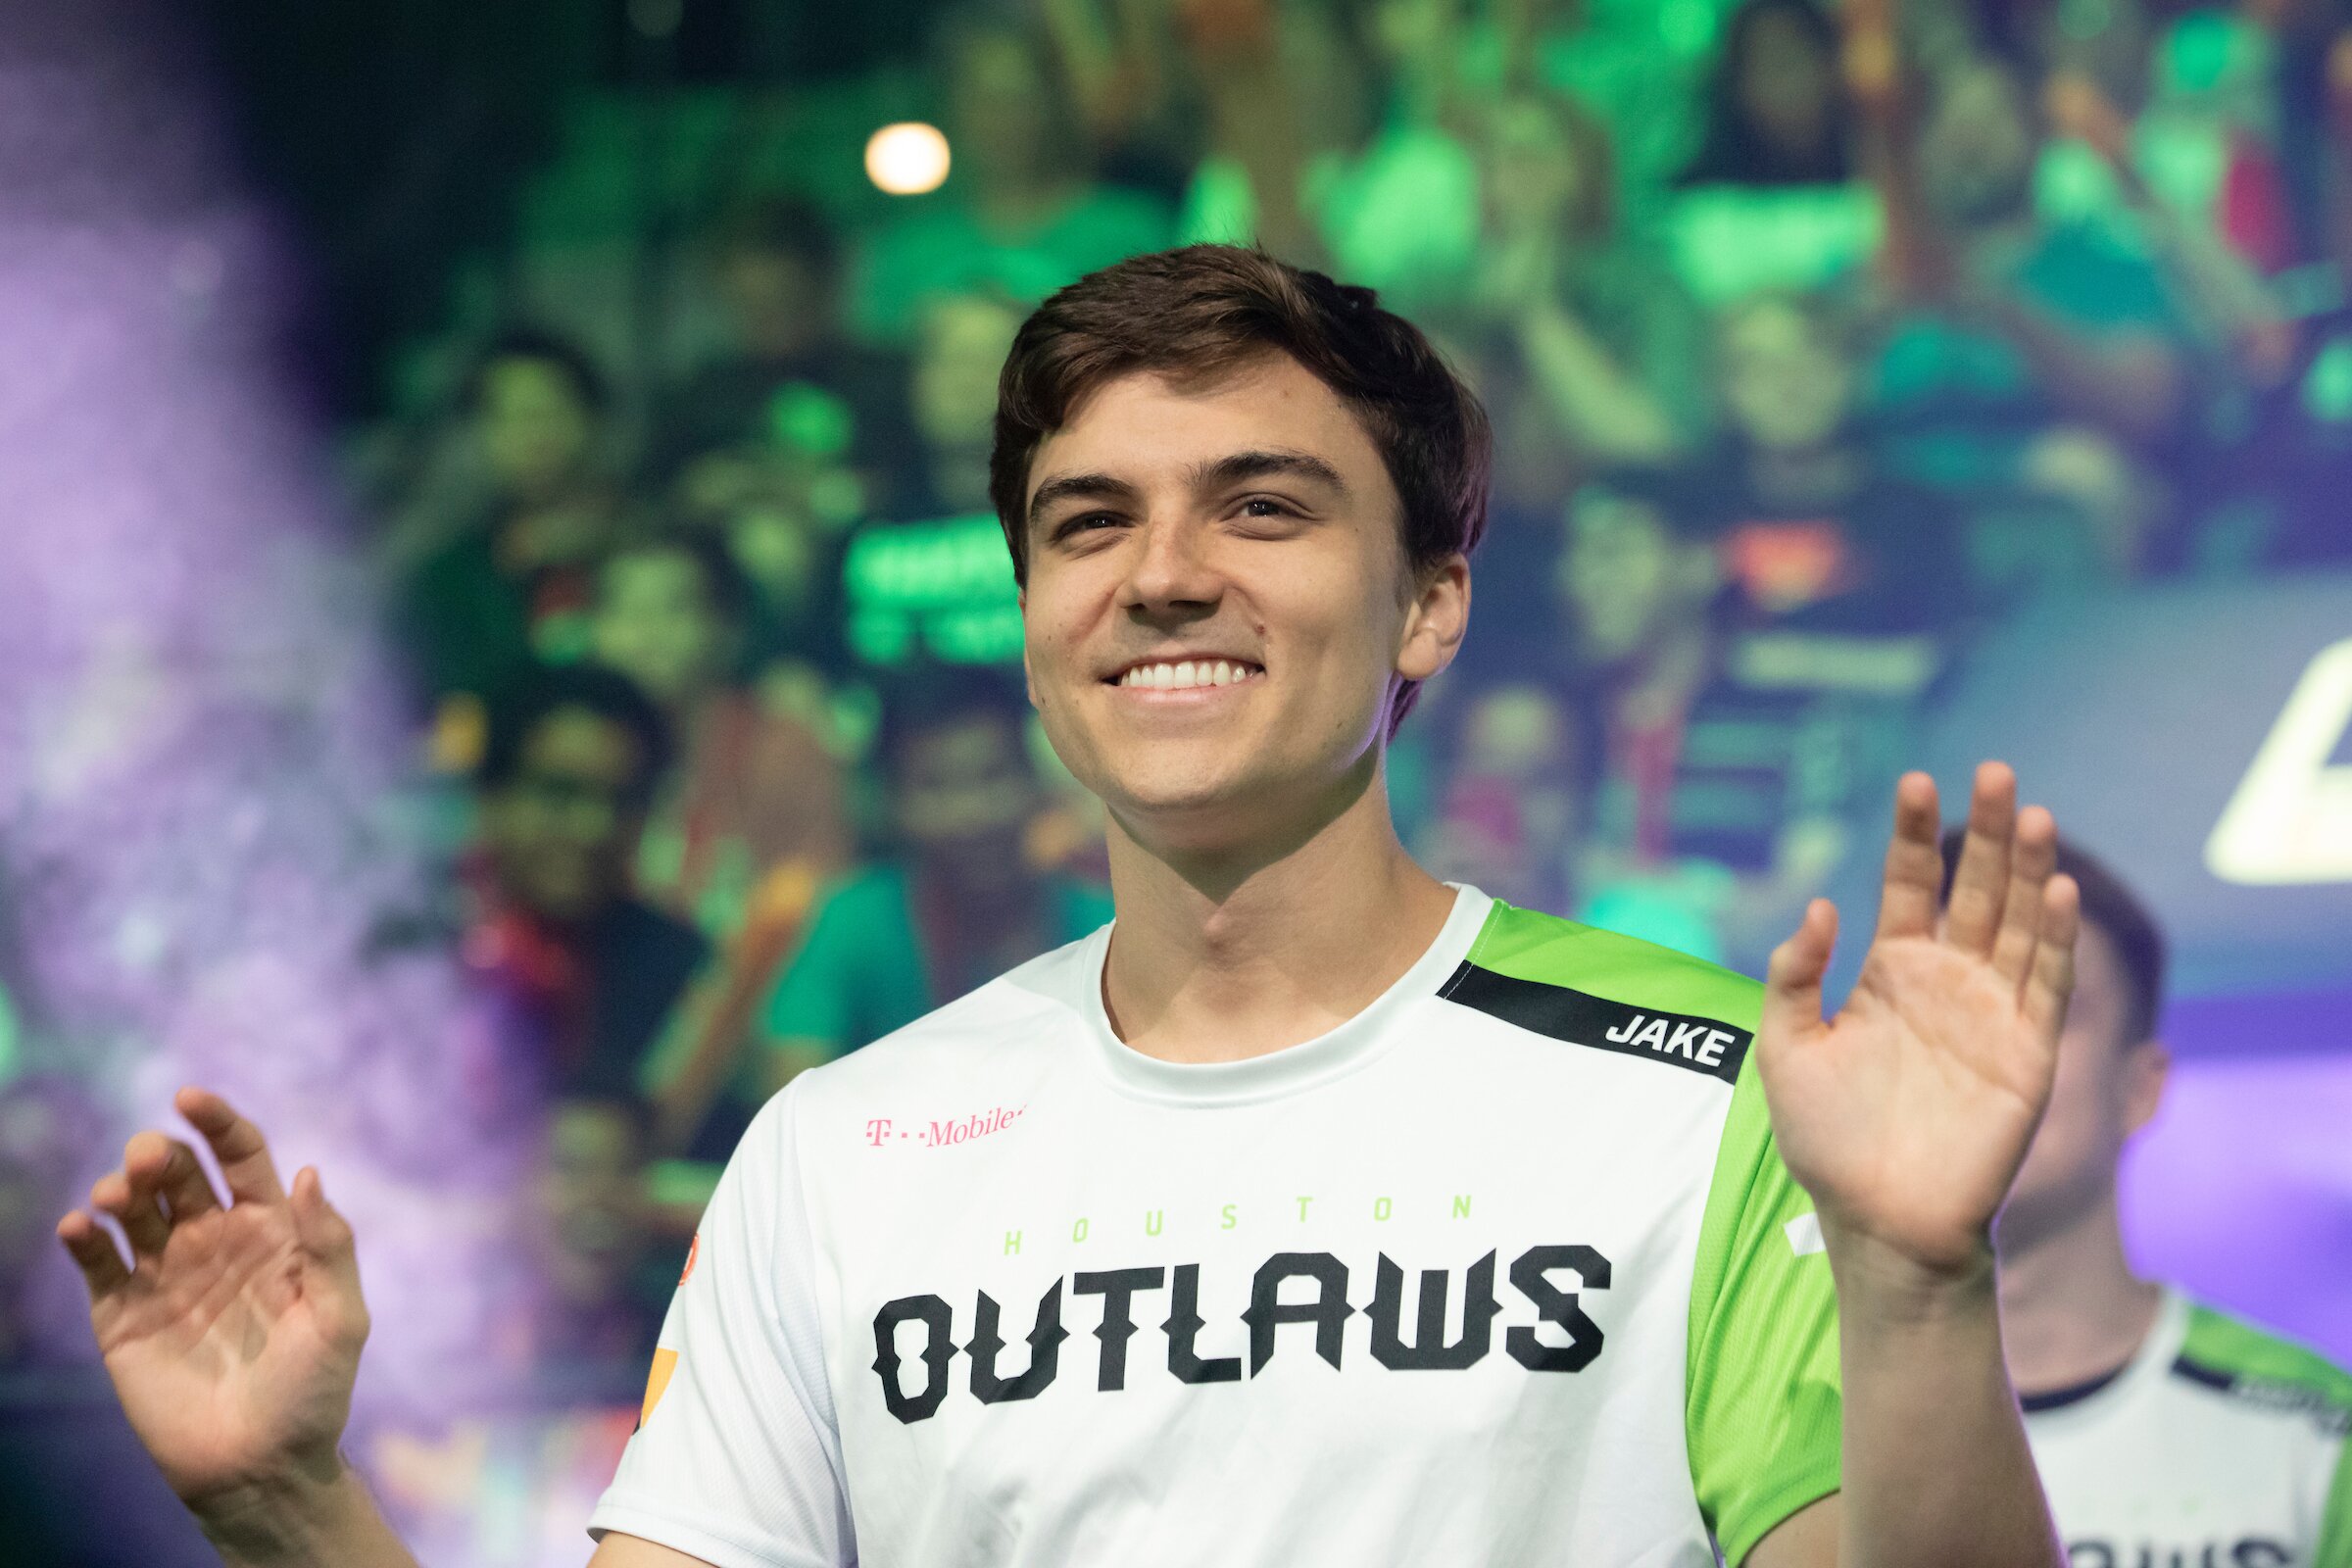 Jake and Custa bring a wealth of playing experience to the Overwatch League casting crew (Image via Blizzard Entertainment)